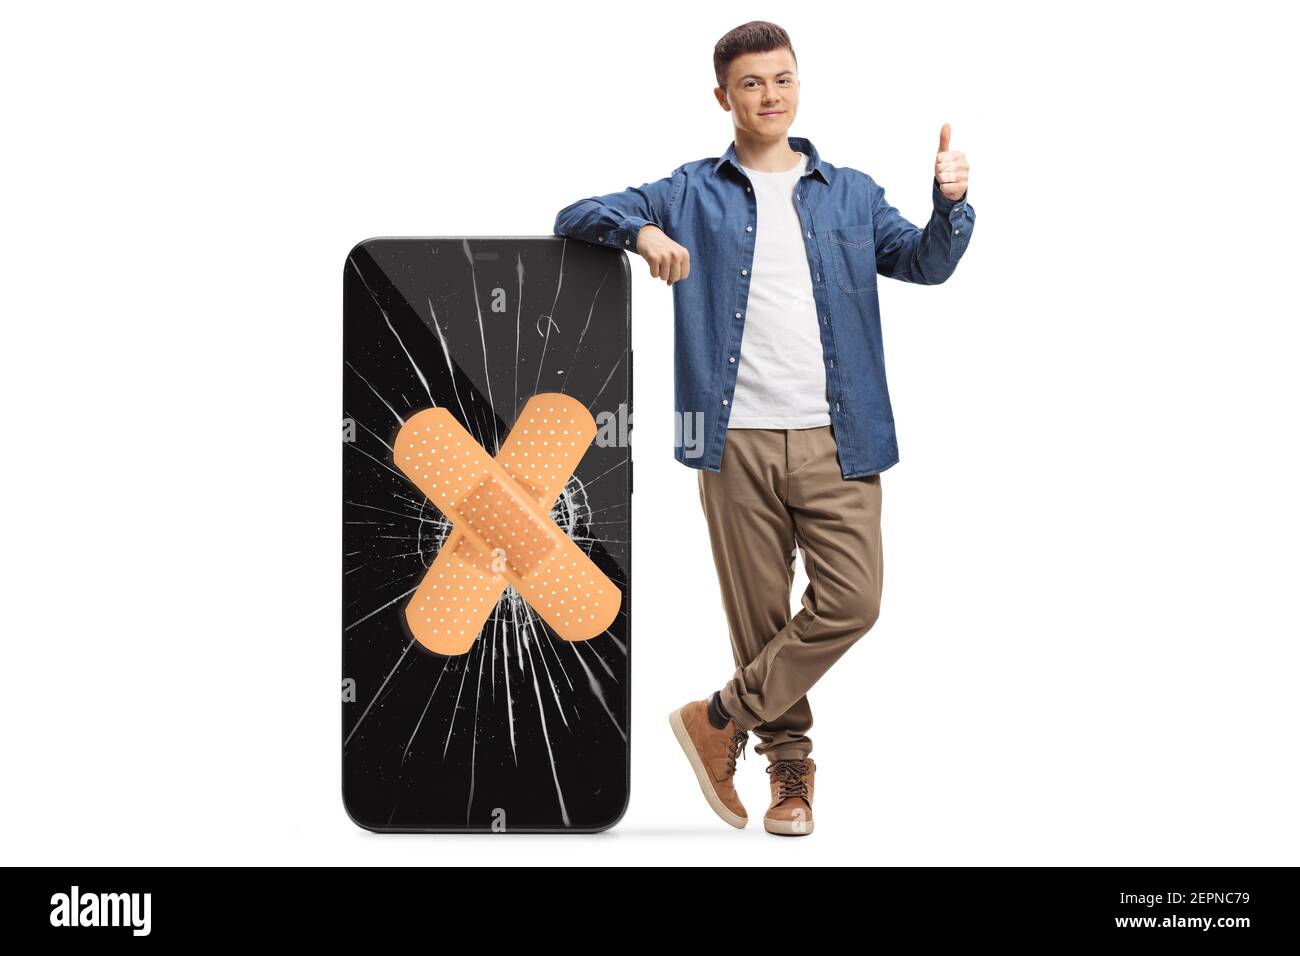 Full length portrait of a guy leaning on a phone with cracked screen and bandage and showing thumbs up isolated on white background Stock Photo